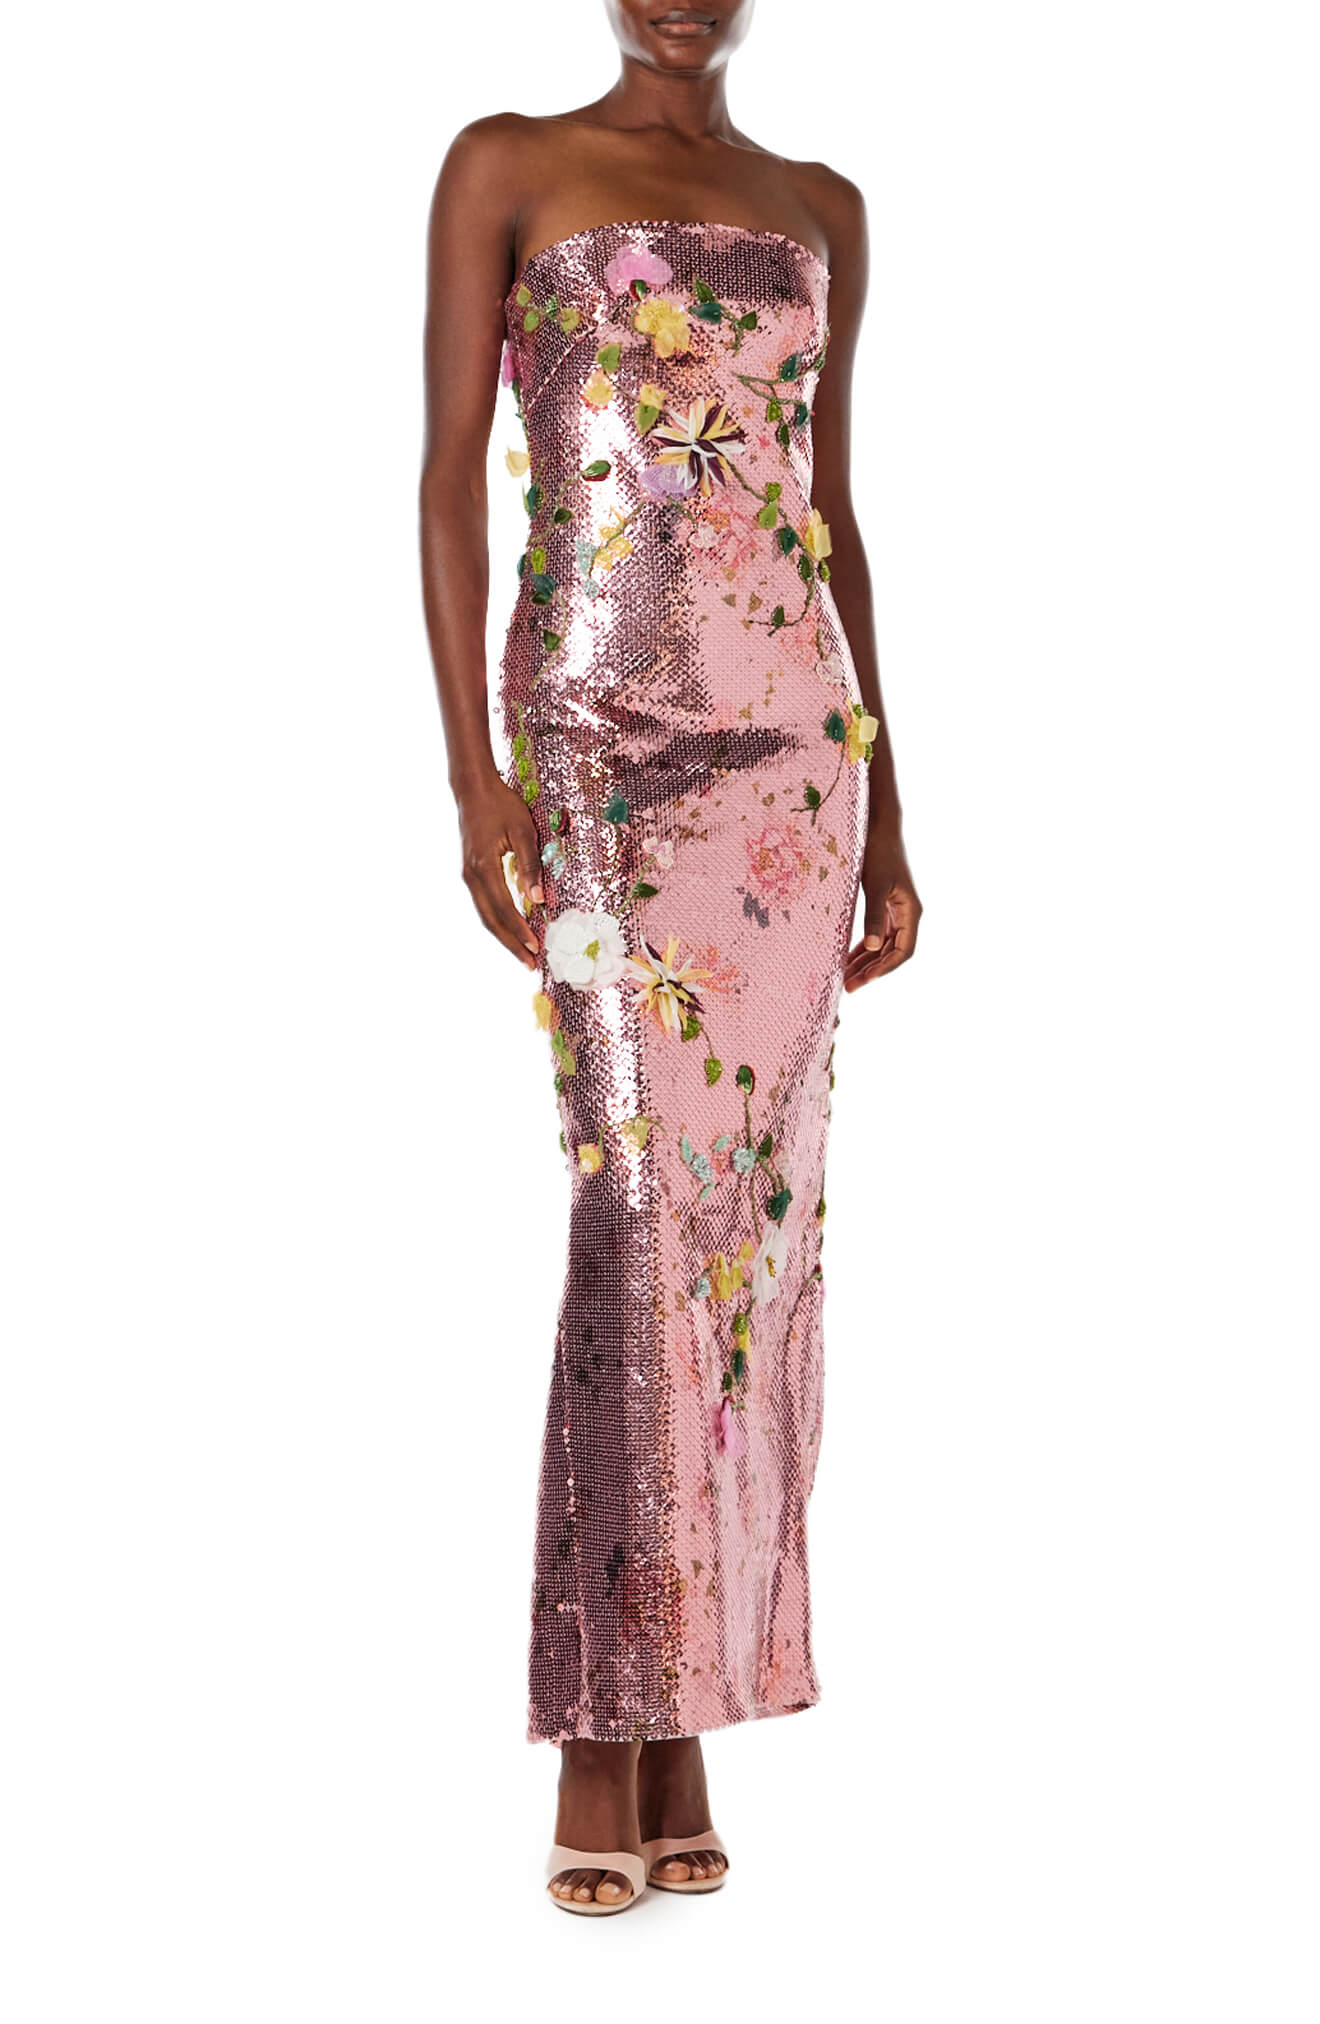 Monique Lhuillier Spring 2024 strapless column gown in cerise colored sequins and floral embroidery - side one.